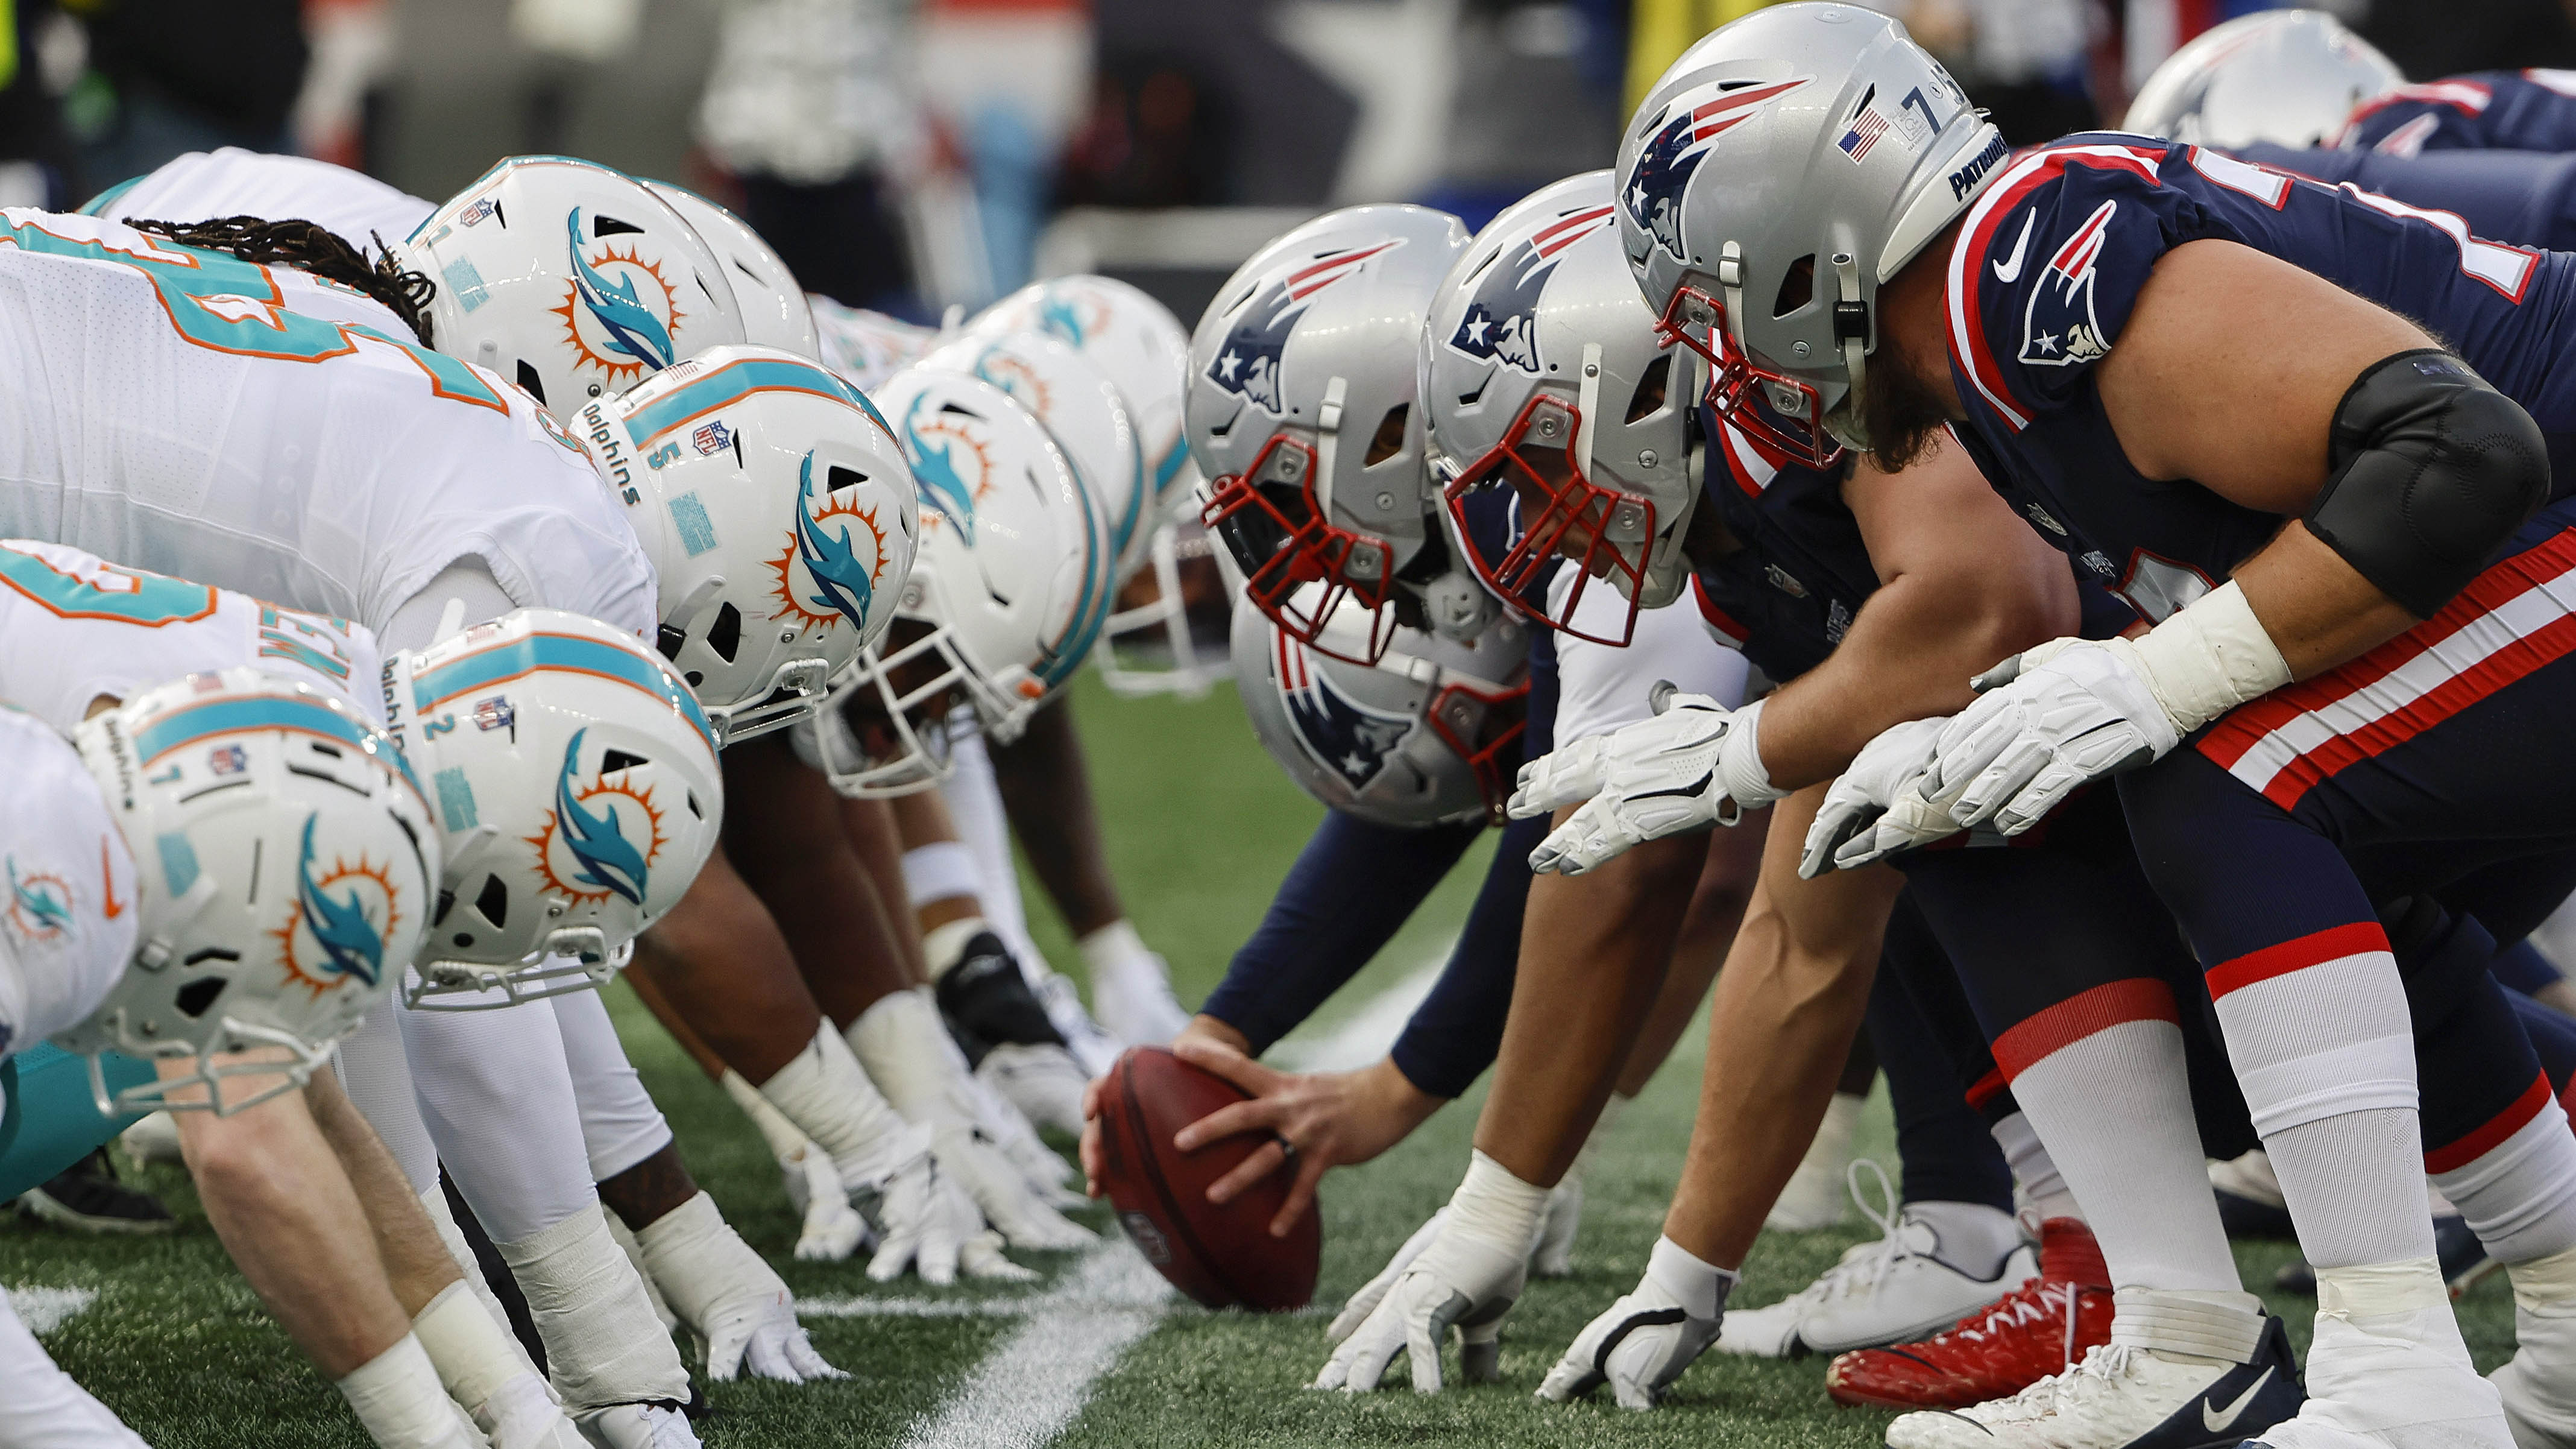 Patriots vs. Dolphins: How to watch Sunday Night Football on NBC